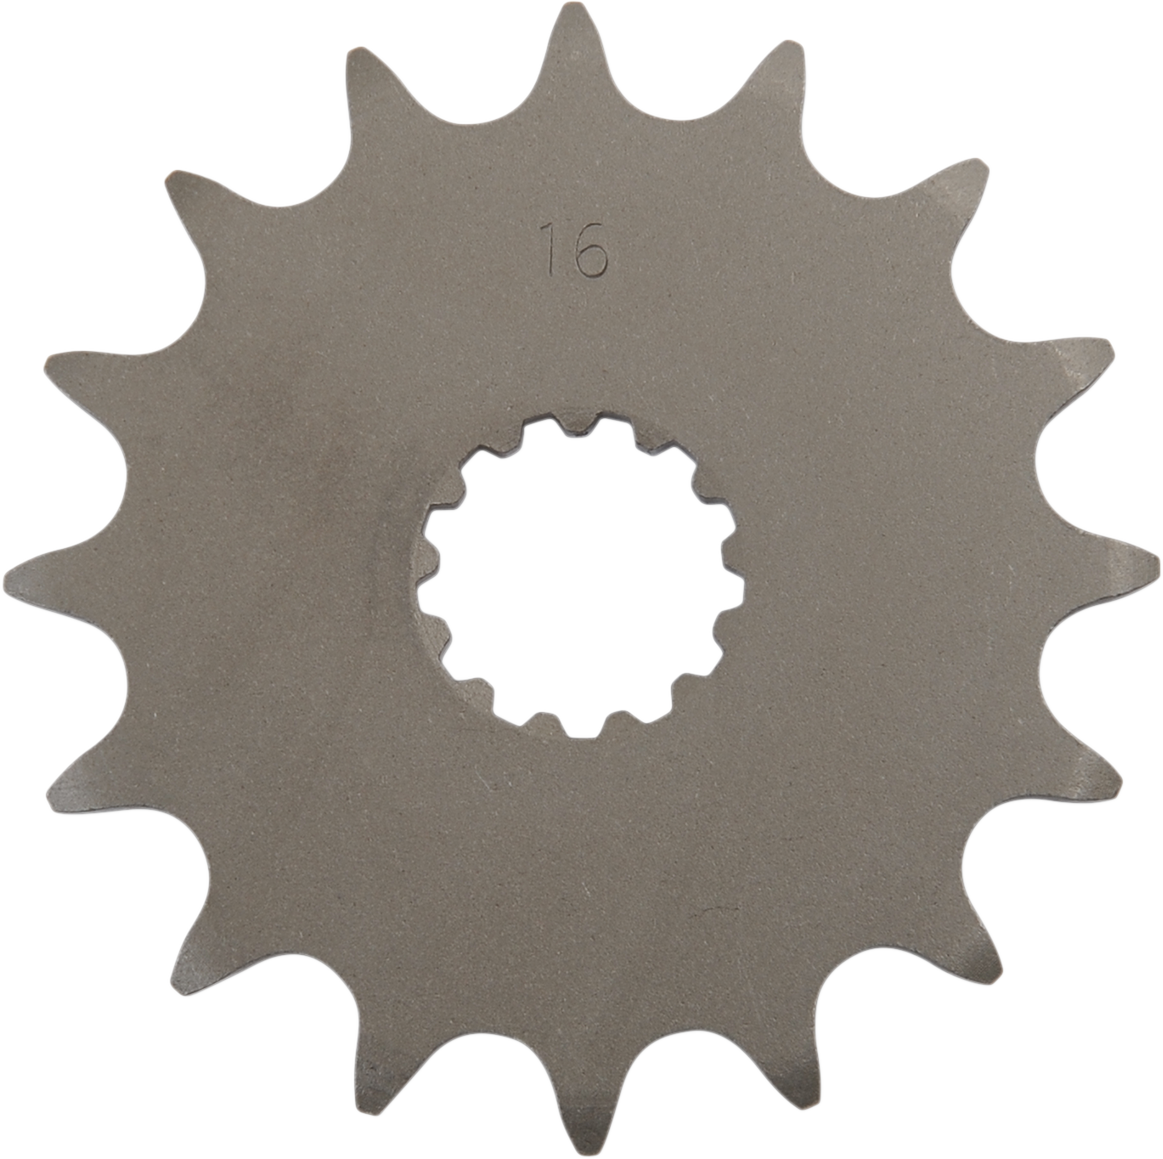 Parts Unlimited Countershaft Sprocket - 16-Tooth 214-17461-60